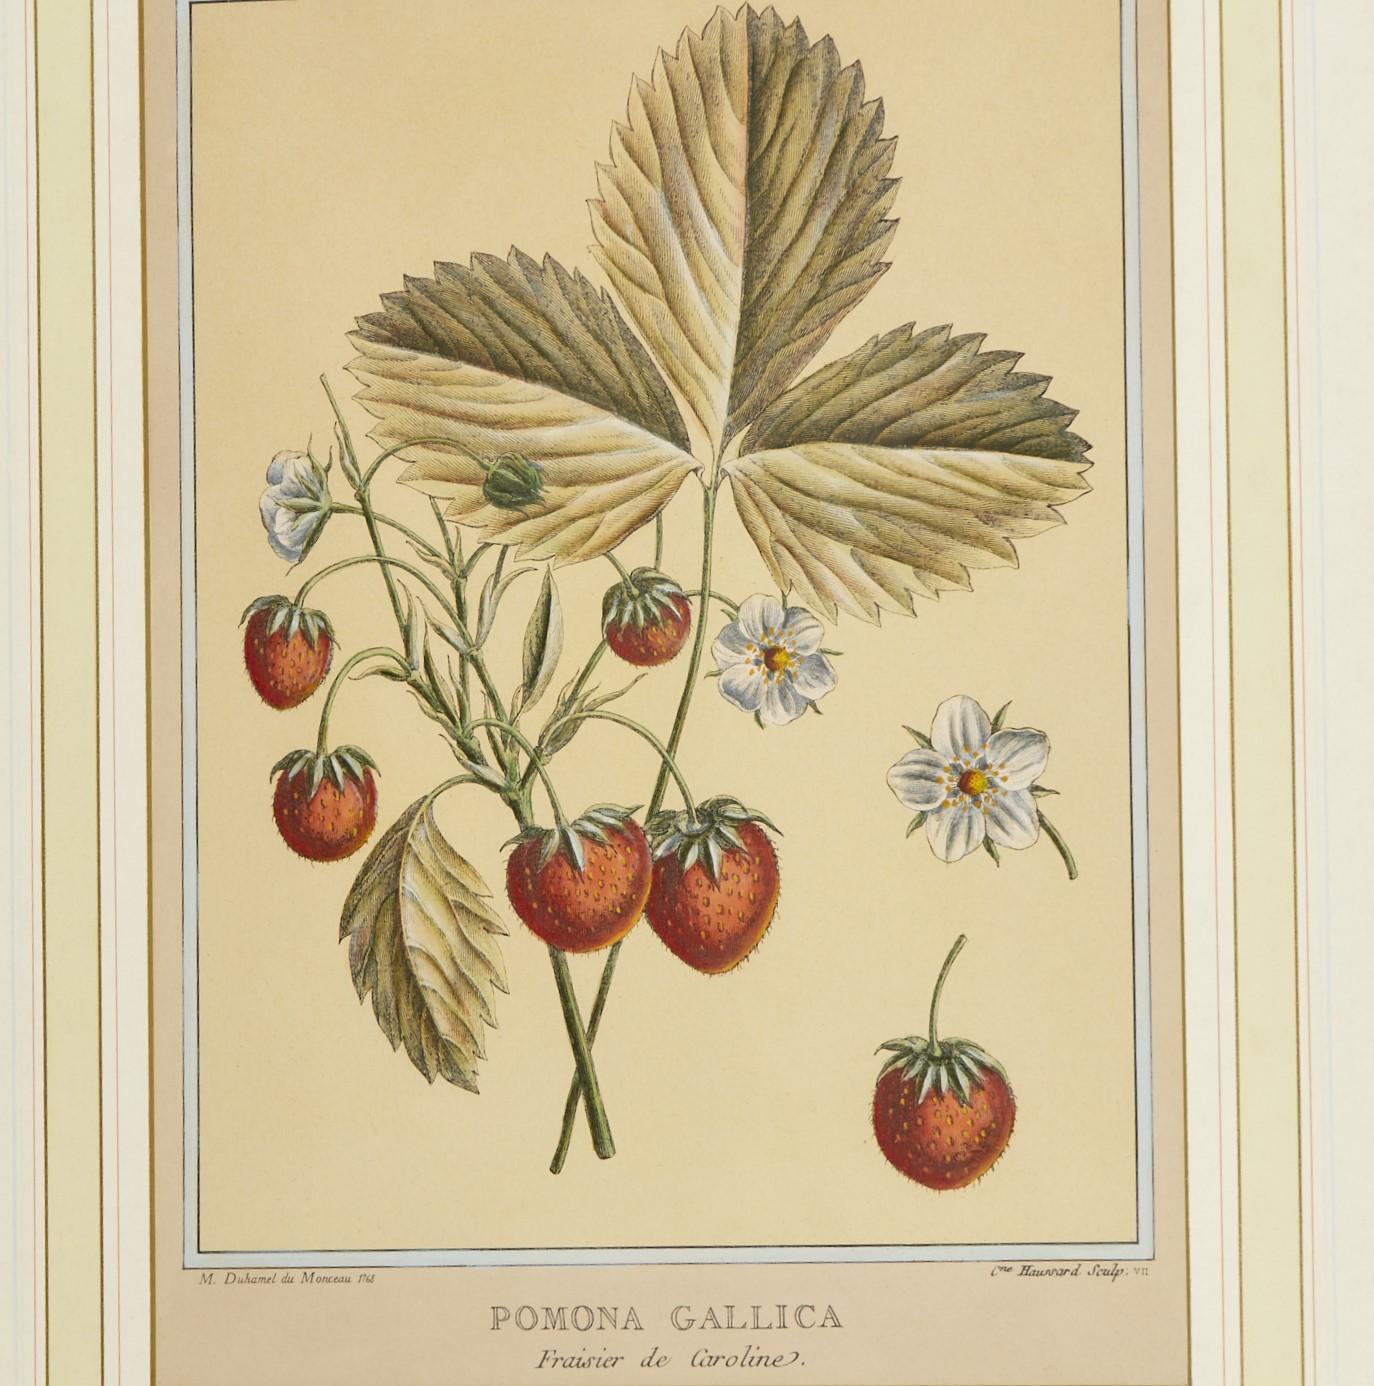 Hand-Painted Vintage, After Duhamel du Monceau, (6) Hand-Colored Prints of Fruits and Berries